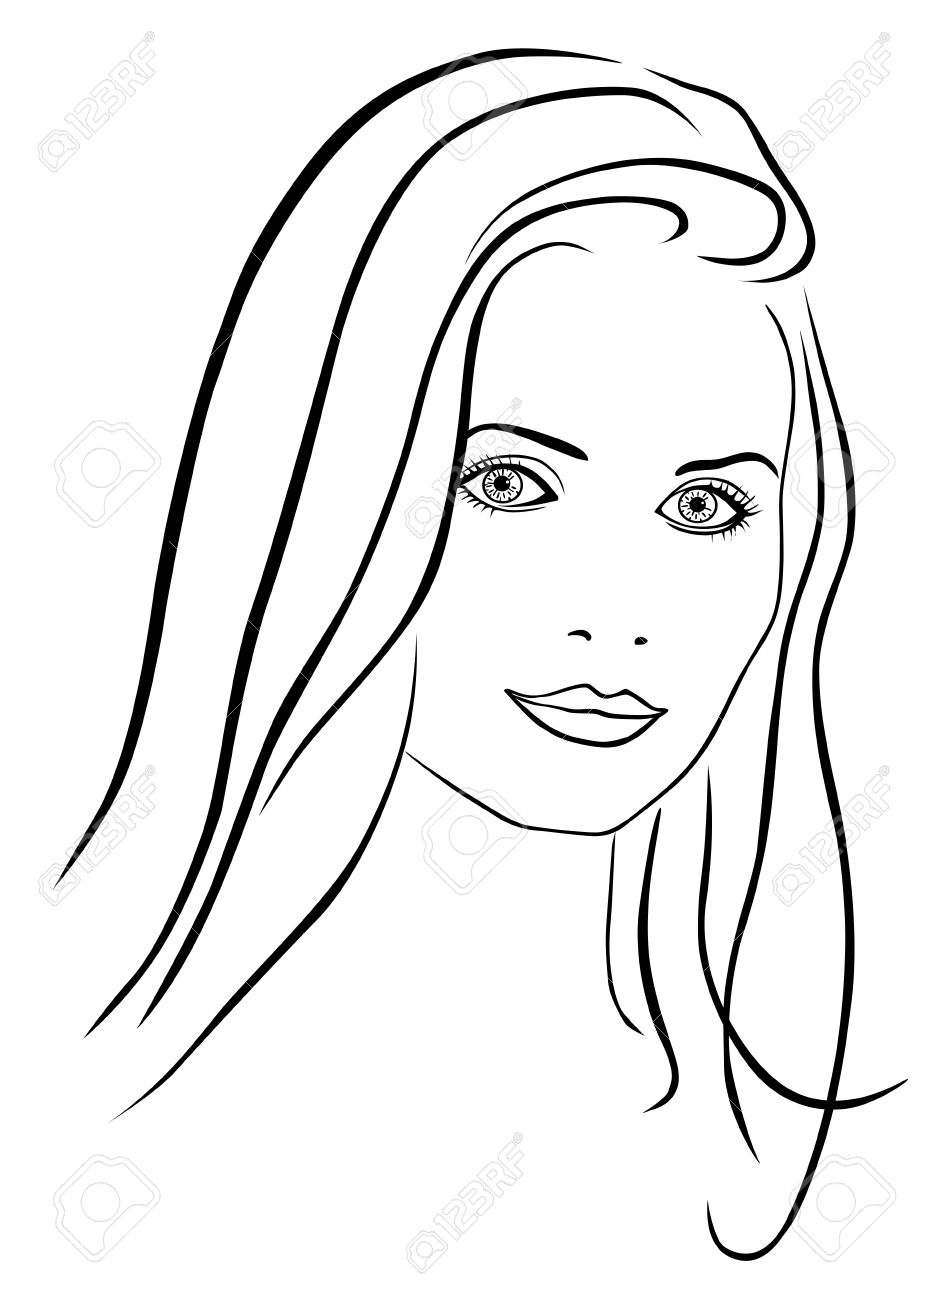 Outline Drawing Of A Woman